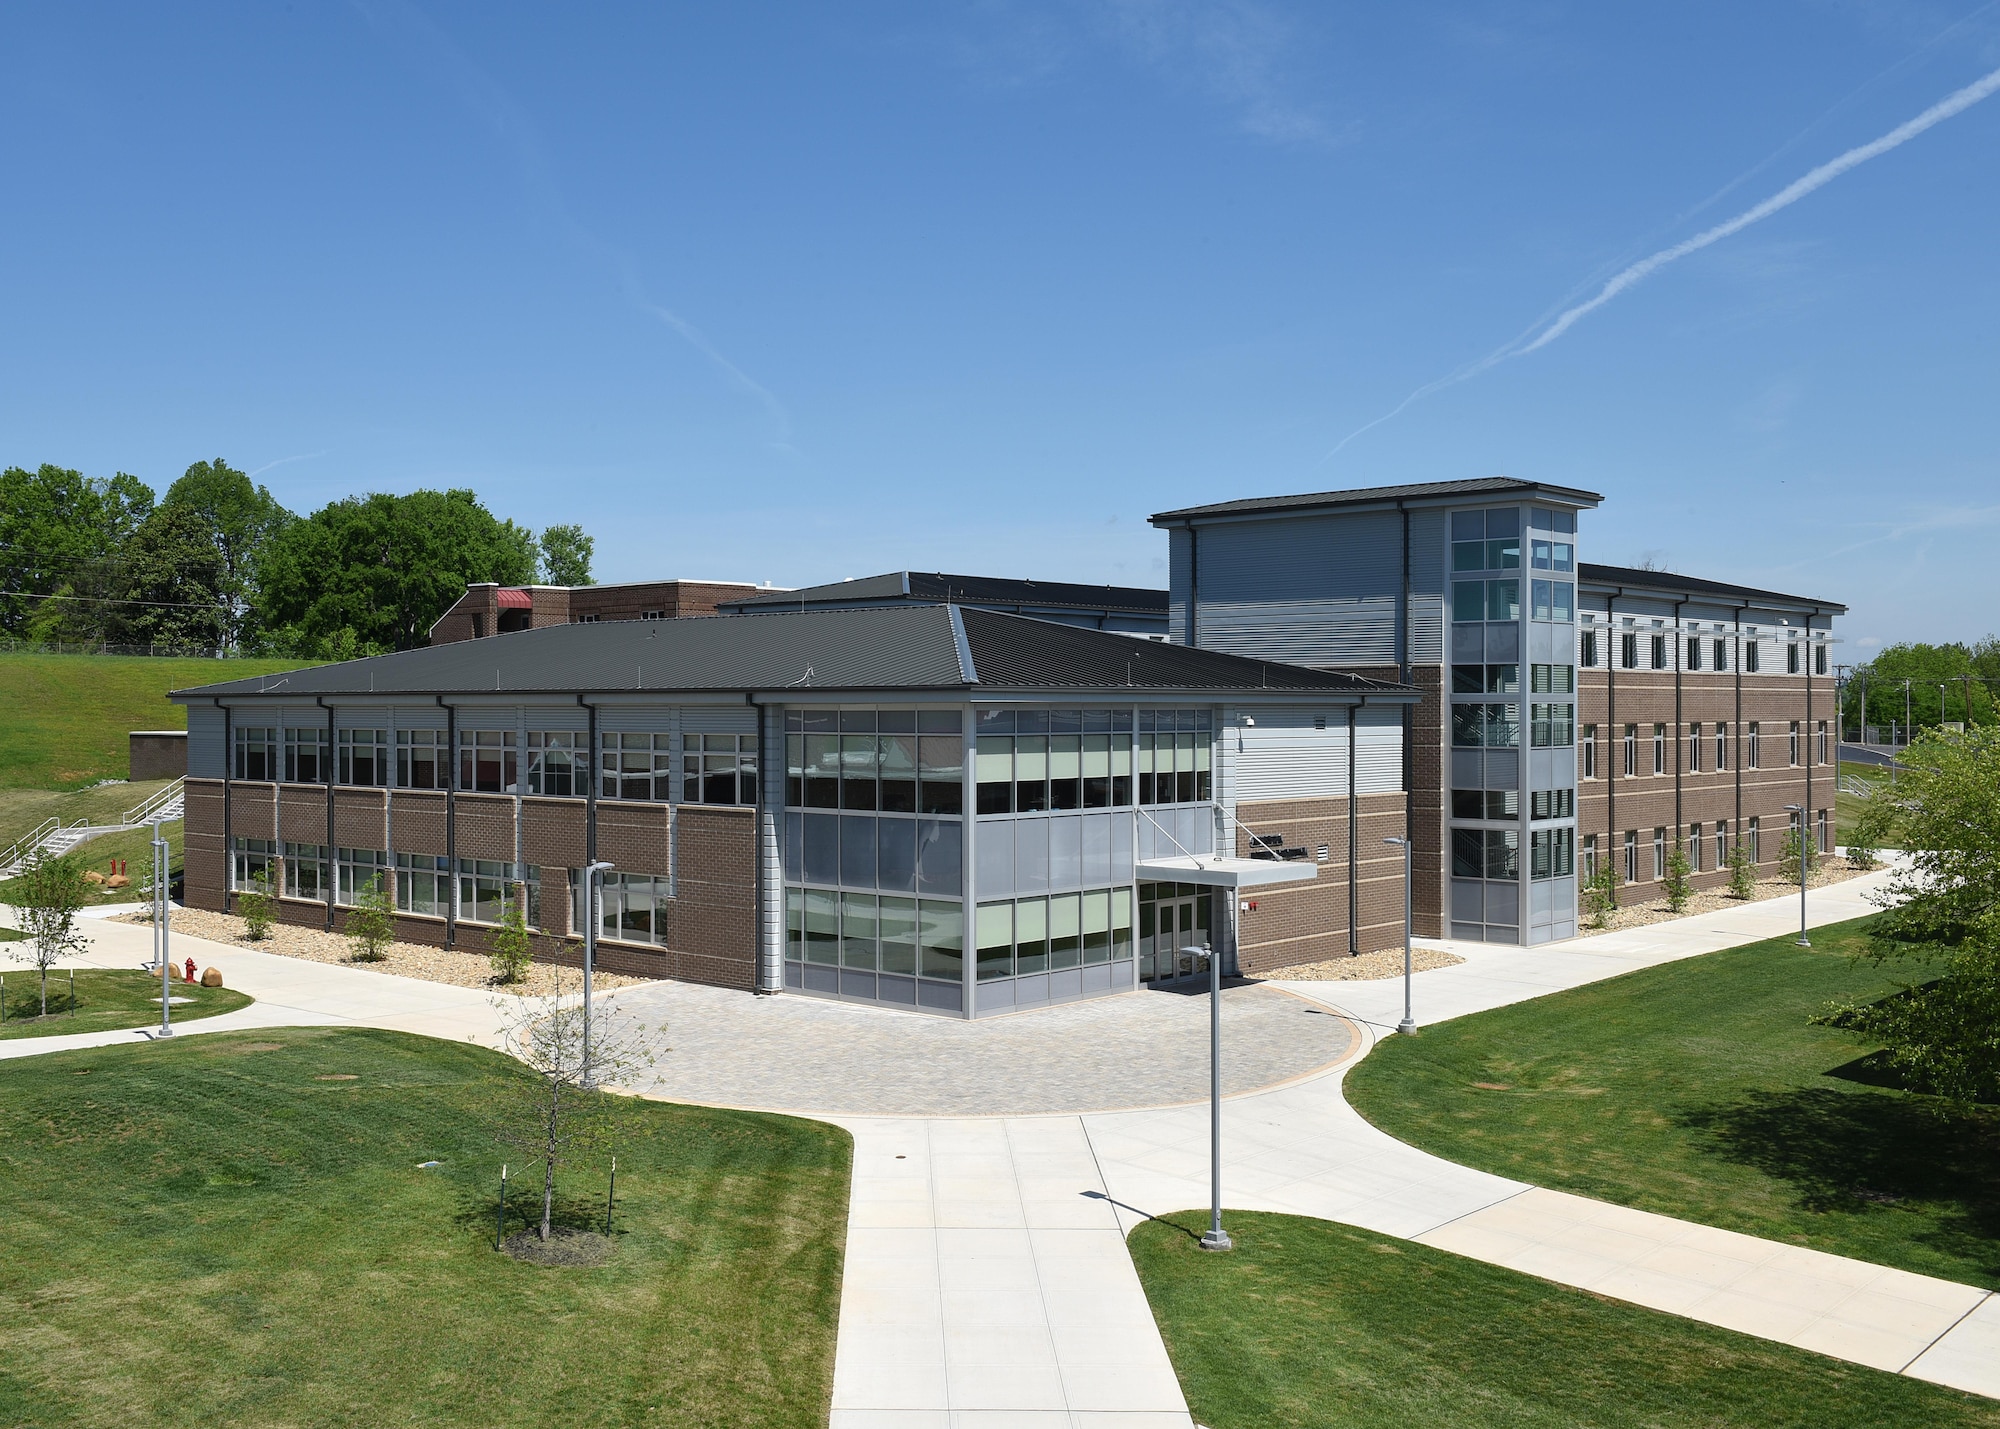 The Air National Guard's I.G. Brown Training and Education Center mixed-use facility, Buildings 418, 414A-B, is a 46,871 square foot classroom and dormitory facility for training and education at McGhee Tyson Air National Guard Base in east Tennessee. The facility was constructed from August 2014 to January 2017. The facility offers free Wi-Fi throughout. There are 97 single occupancy dorm rooms. There are six 31-person classrooms and two 148-person combined classrooms, dividable into three smaller classrooms of 64, 41, and 43, or of those combinations. (U.S. Air National Guard photo by Master Sgt. Mike R. Smith)